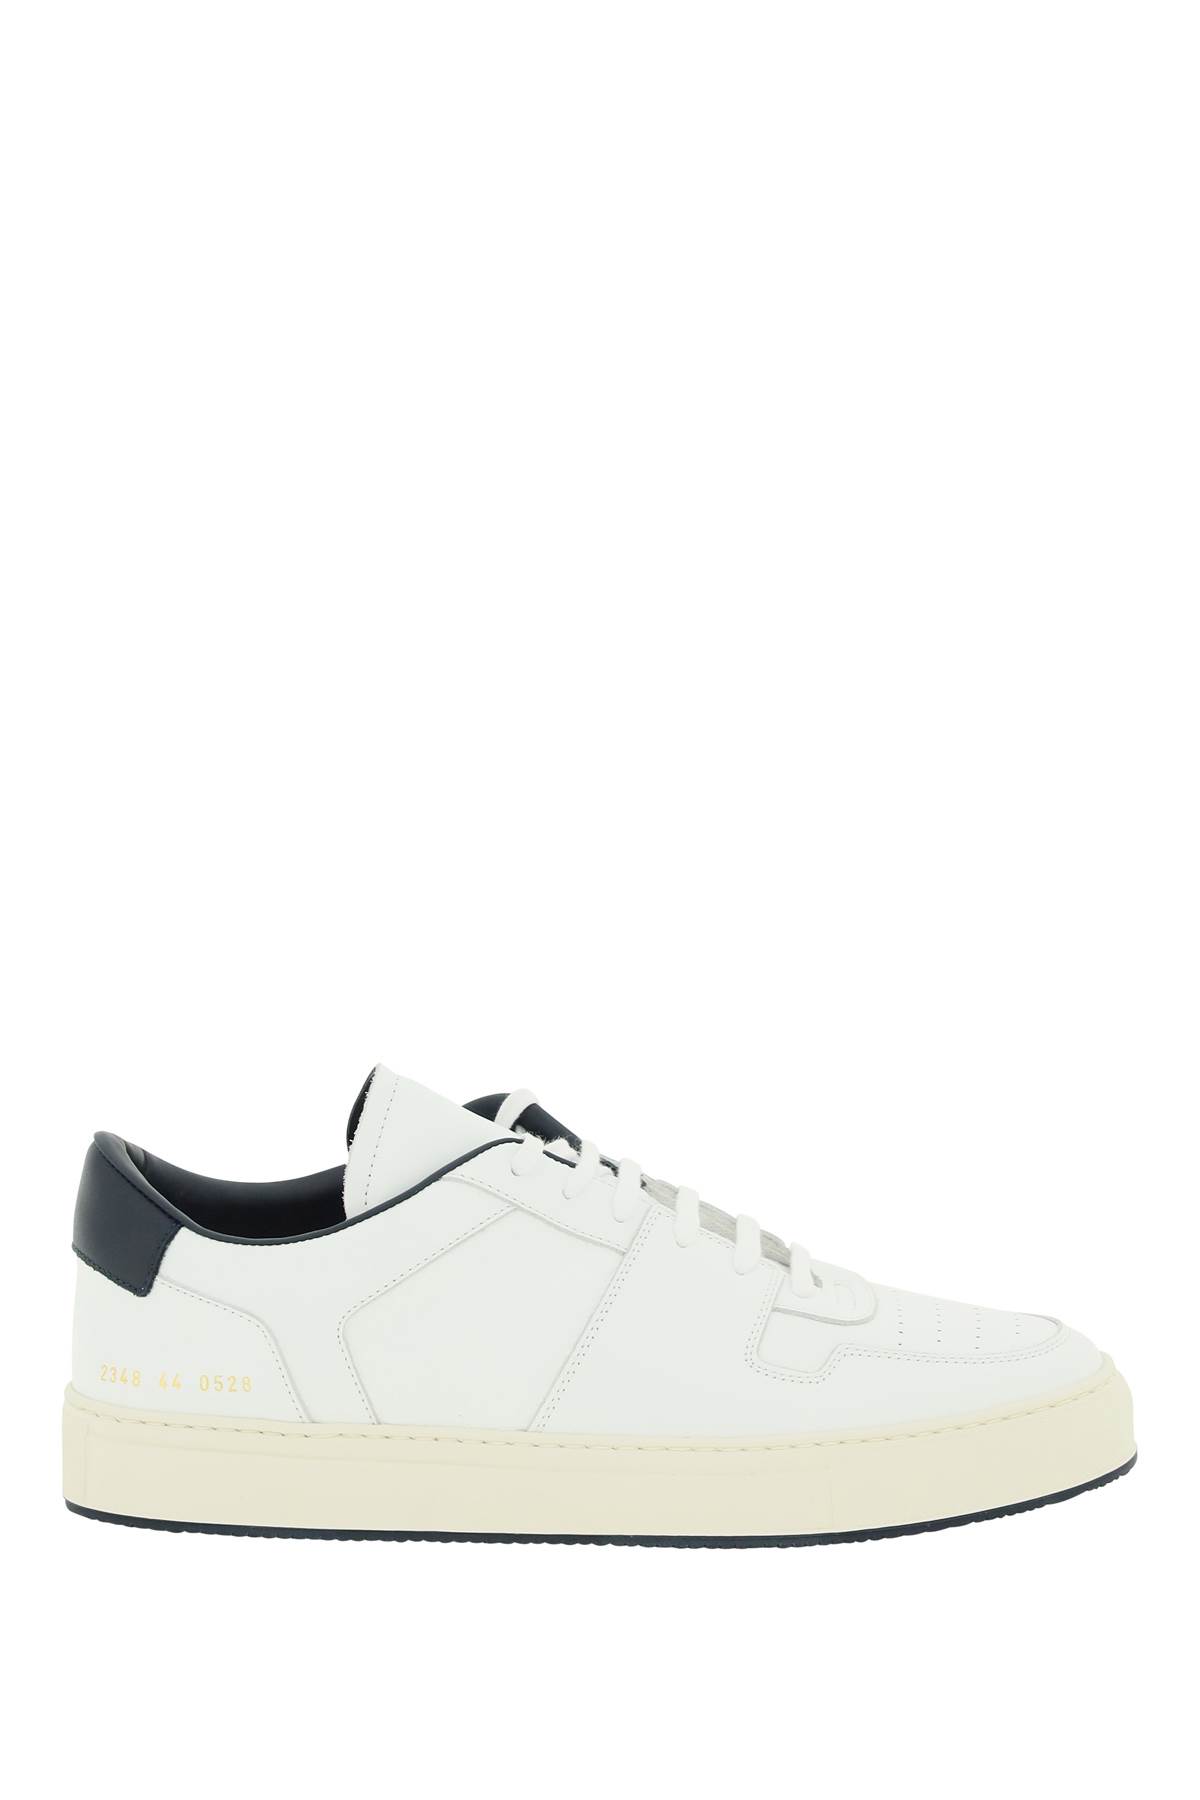 Common Projects Leather Decades Low Sneakers